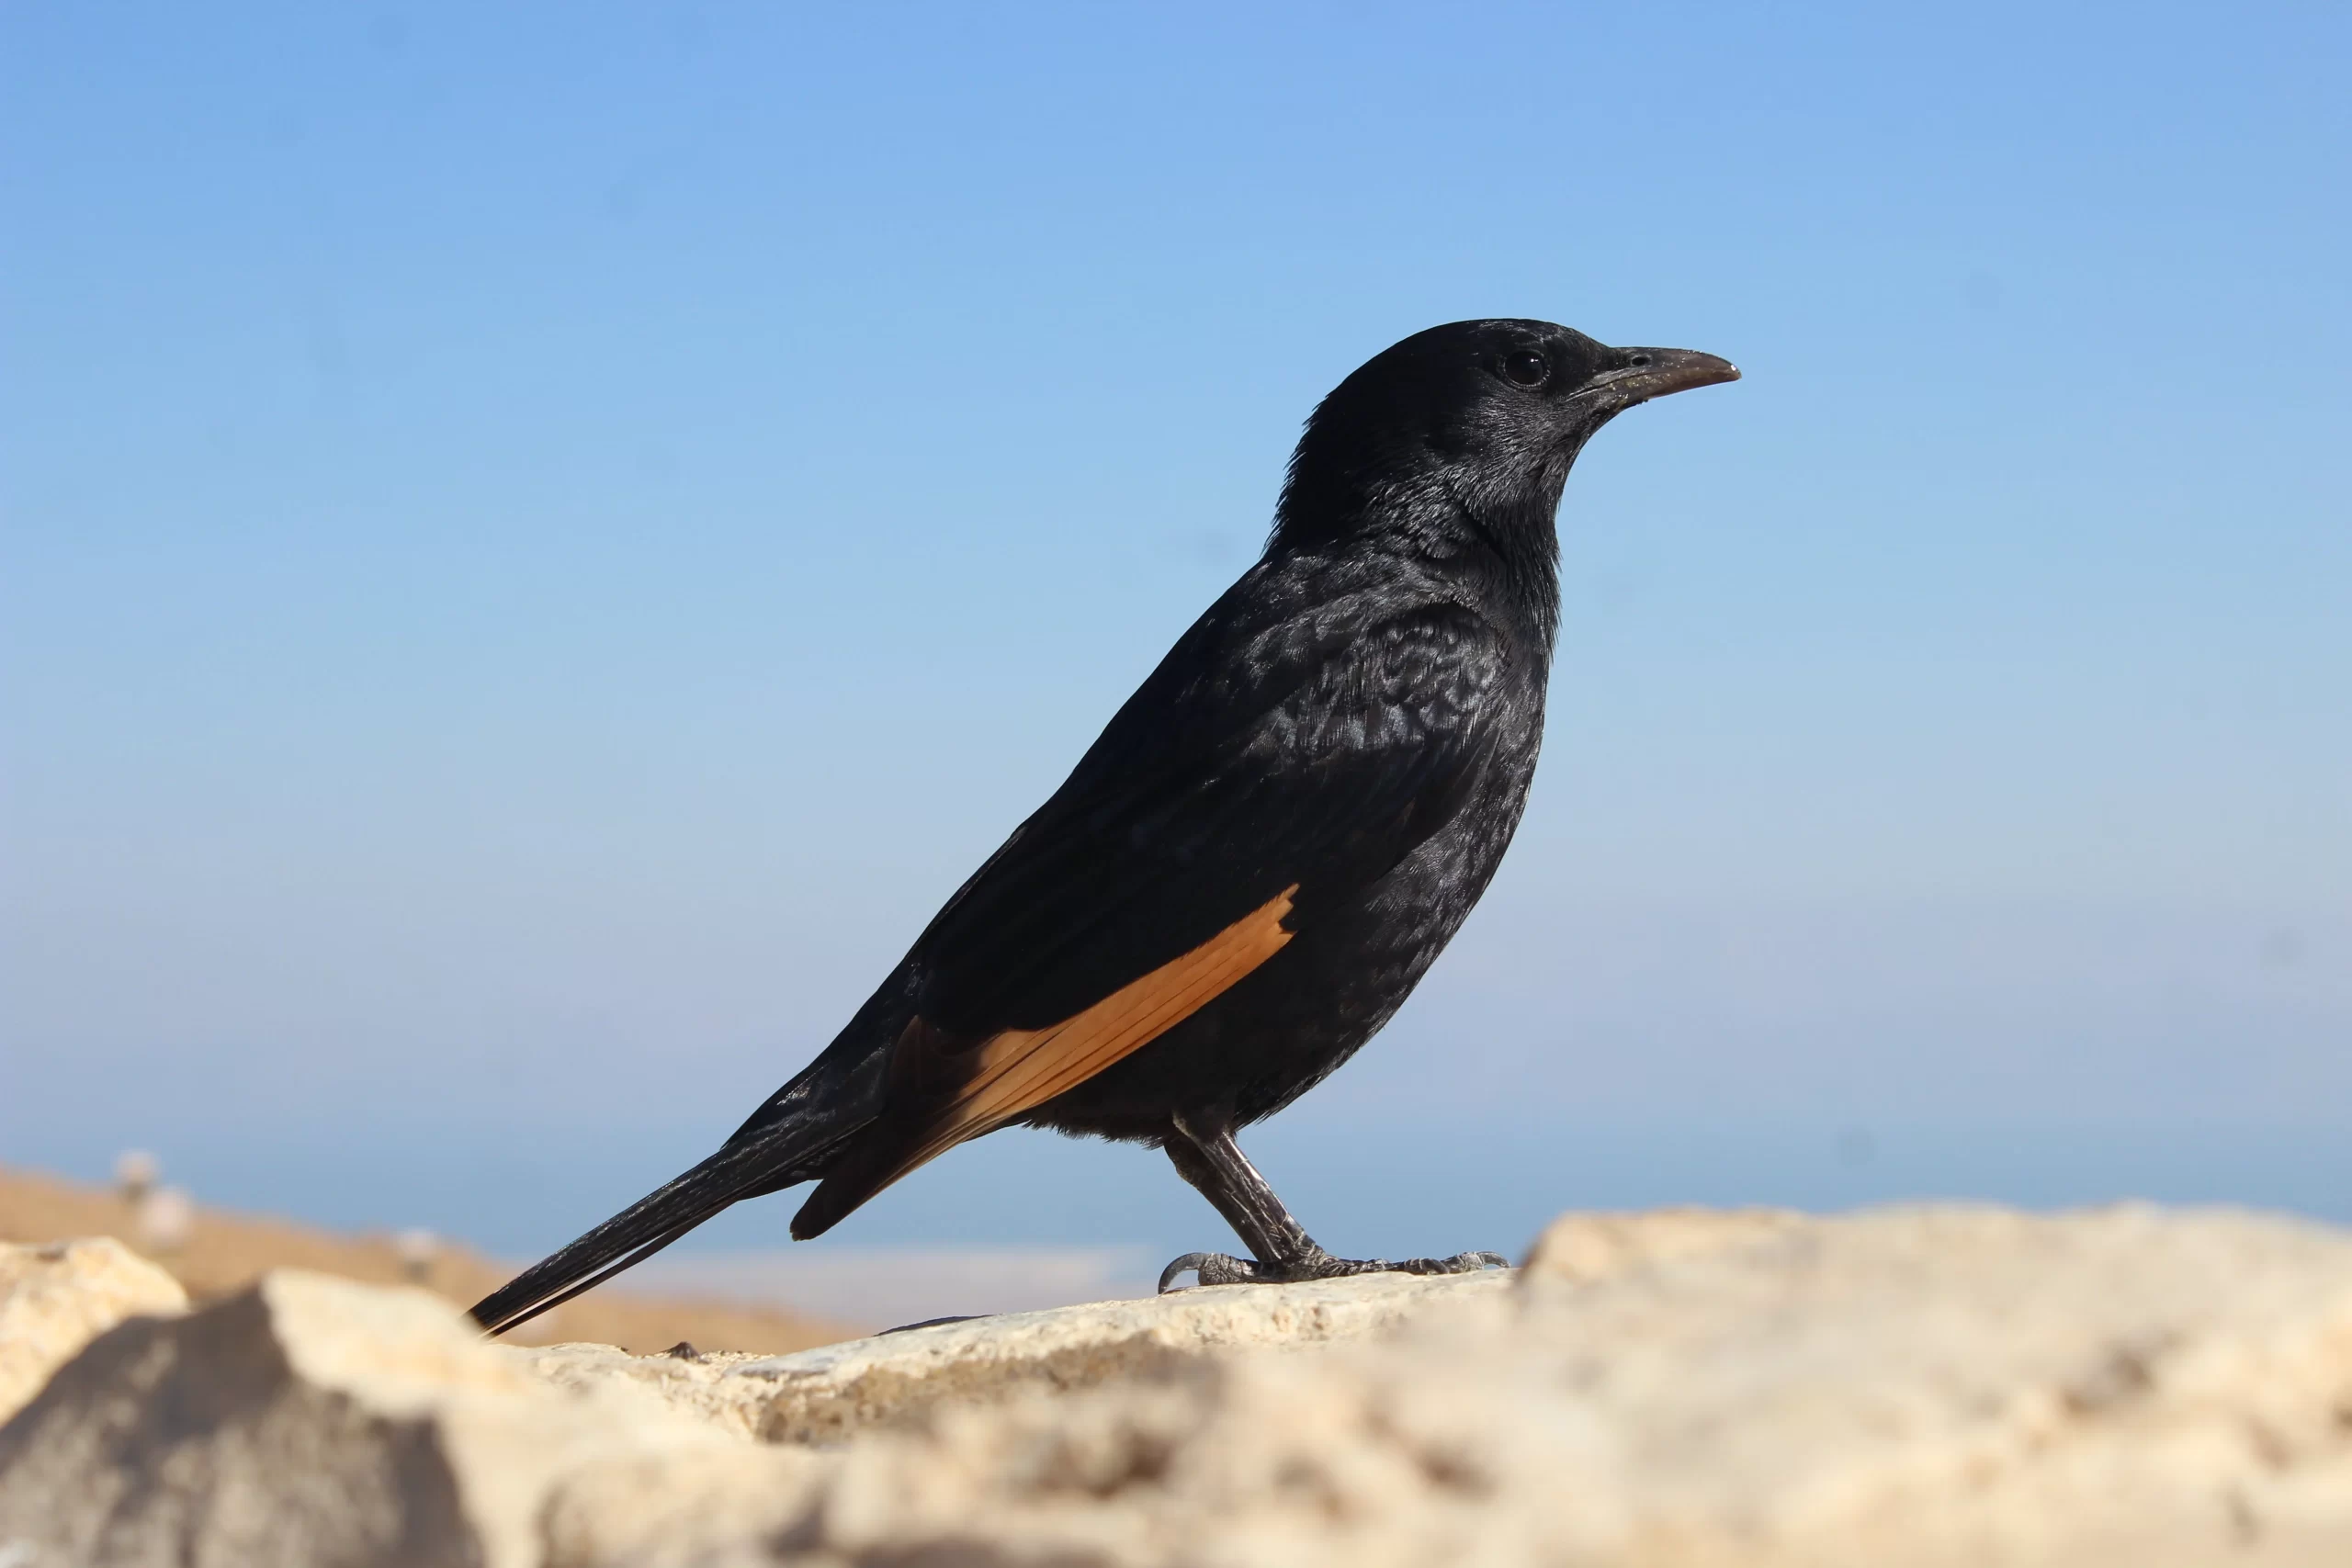 Distinguishing between a starling vs. grackle can be challenging. Luckily, there are some traits and features that can be used to separate these birds.